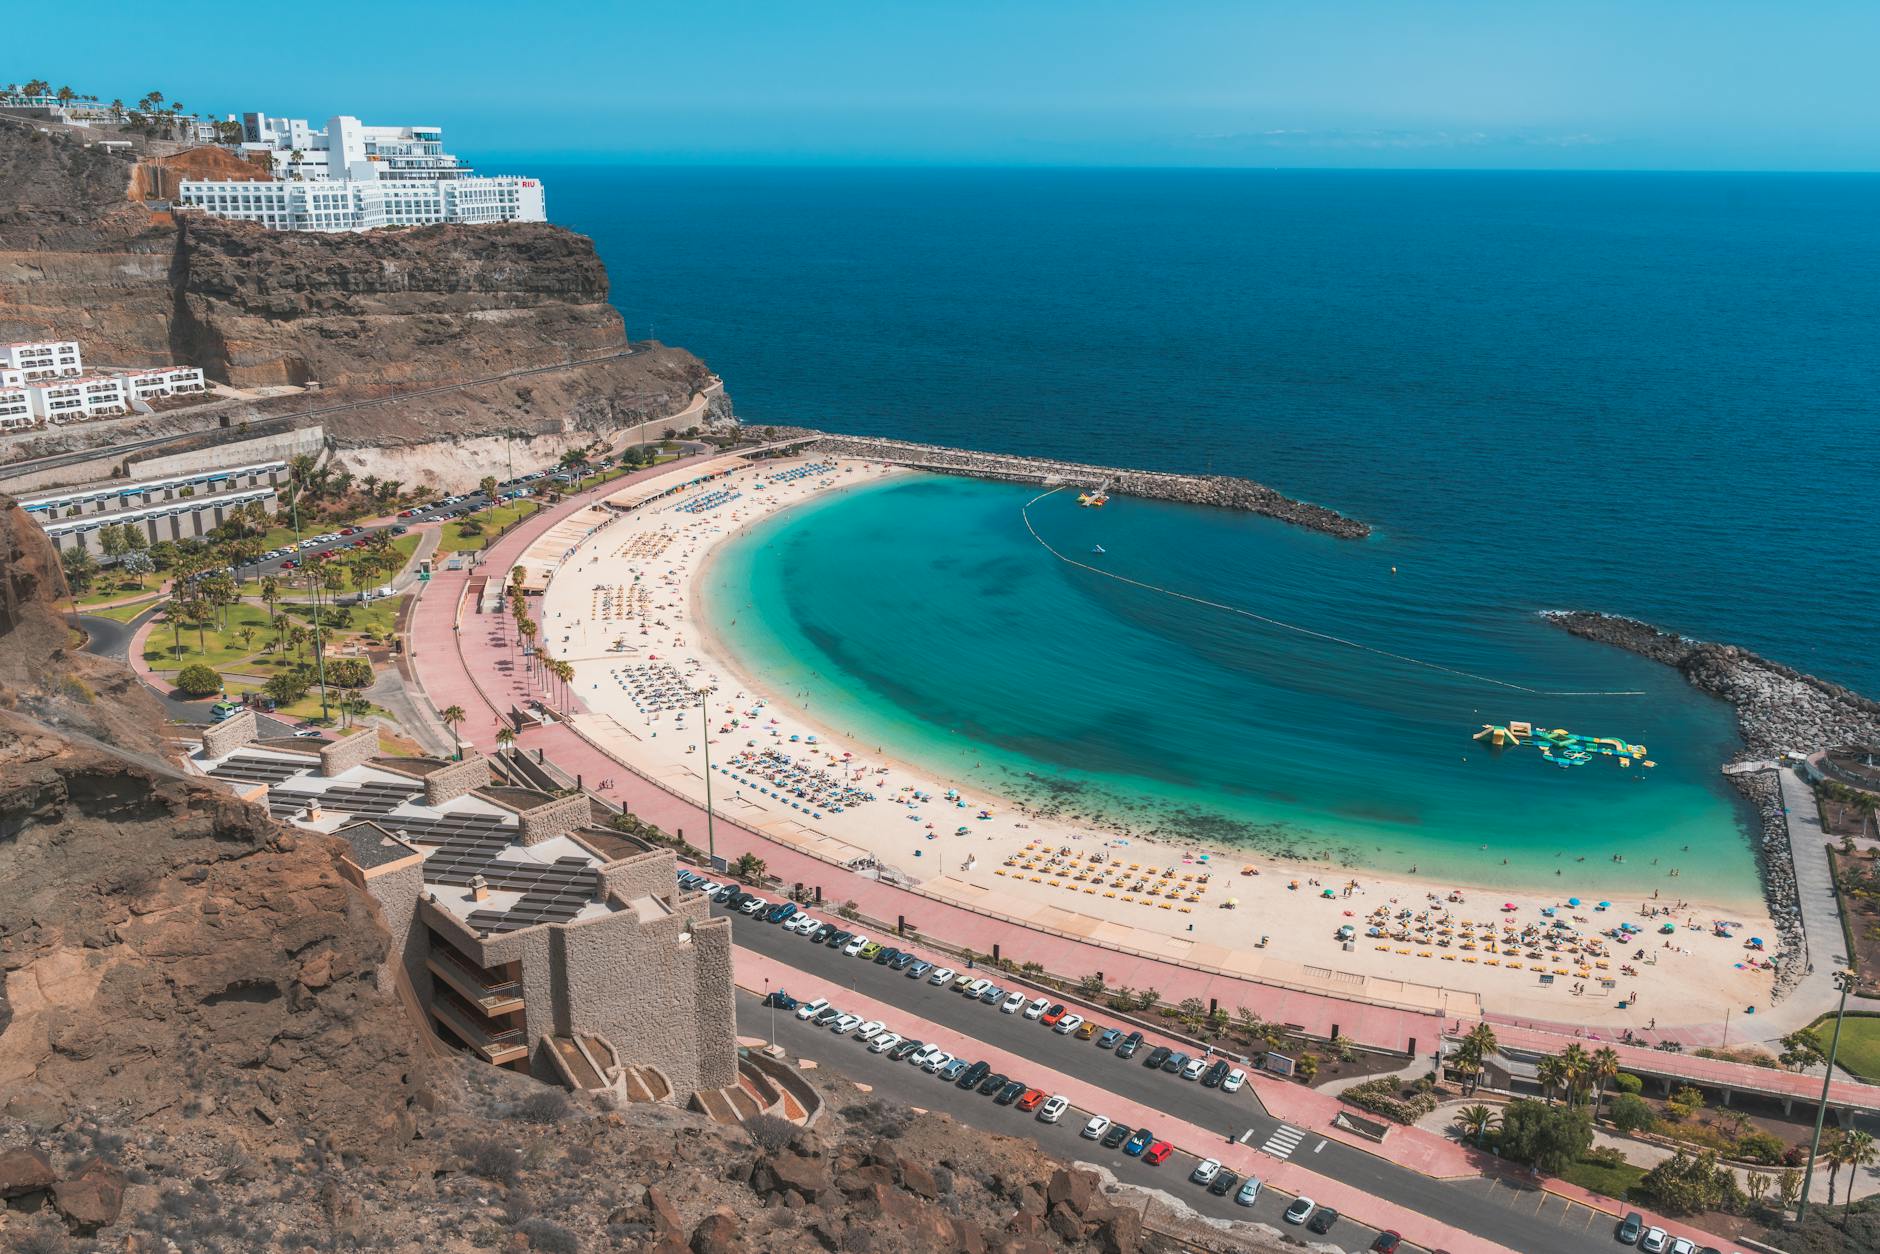 The Canary Islands Special Zone (ZEC): A Booming Haven for Tech Startups and Remote Workers